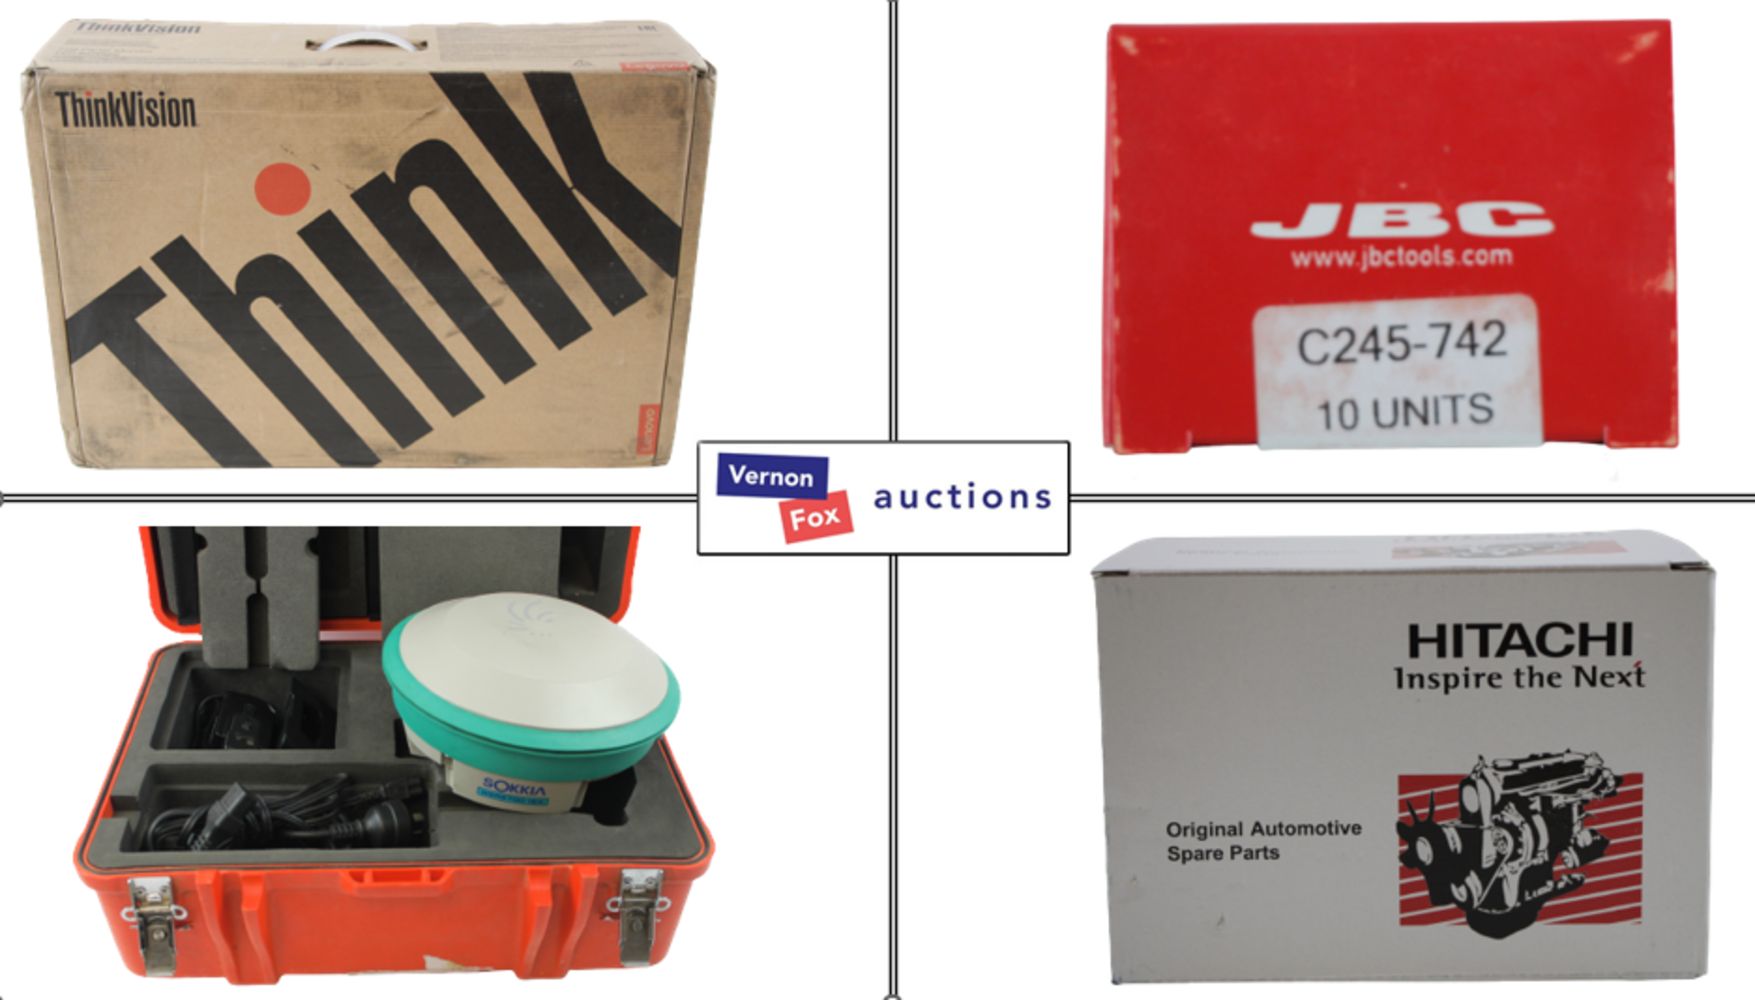 TIMED ONLINE AUCTION: A wide choice of IT Accessories, Gaming, Audio & Musical Items. FREE UK DELIVERY!